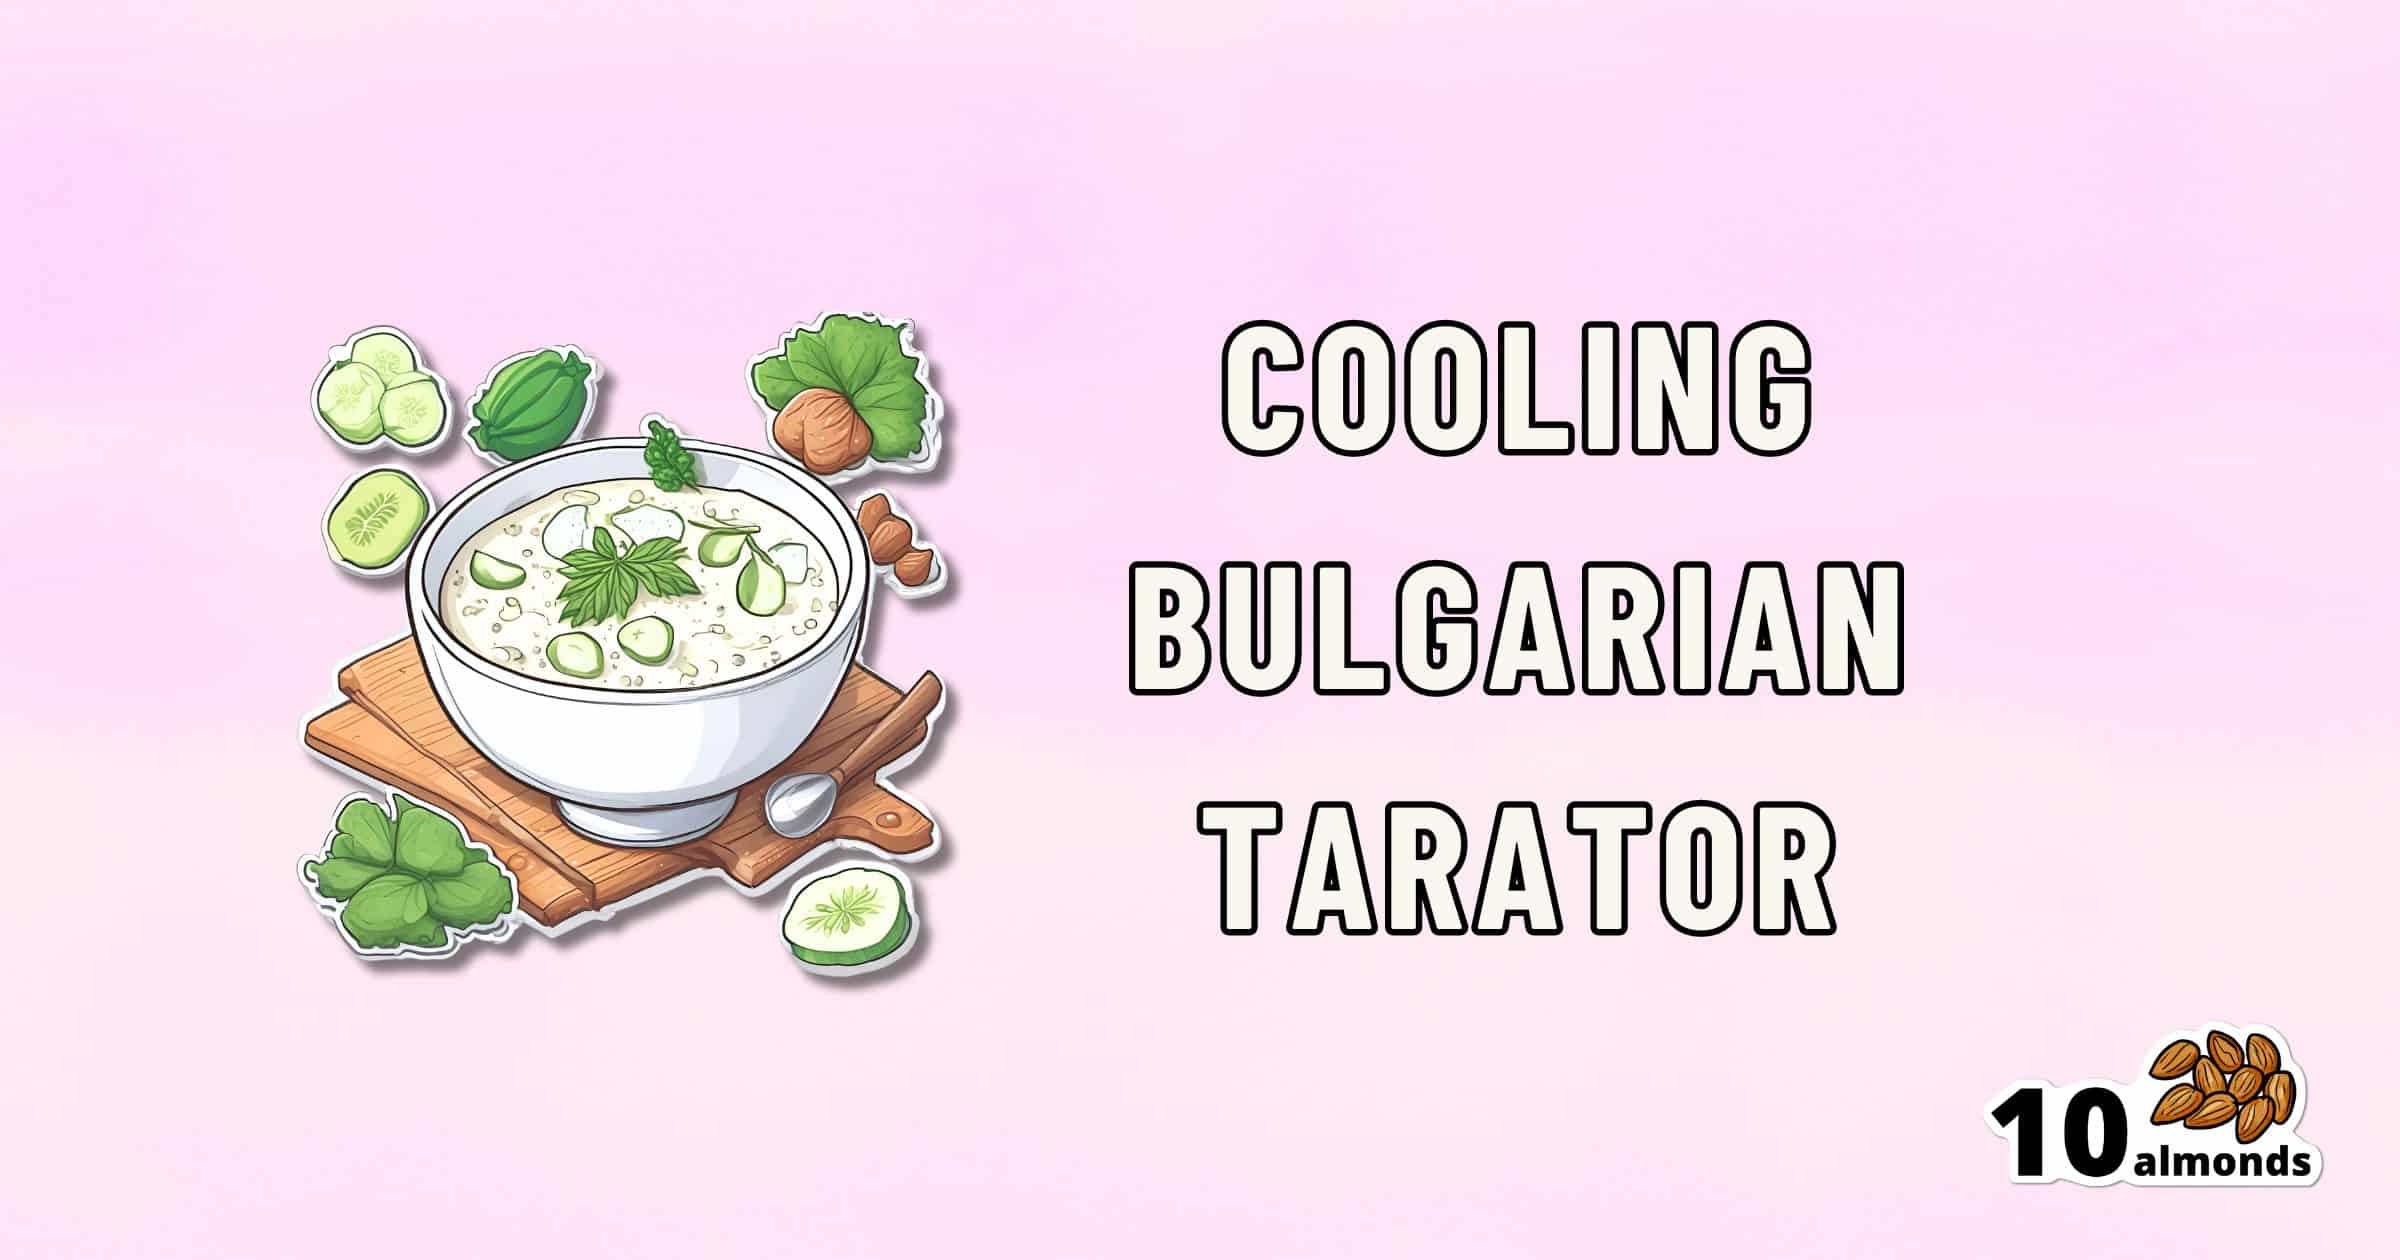 A white bowl of Cooling Bulgarian Tarator soup garnished with herbs, placed on a wooden board with sliced cucumbers and walnuts around it. The text "COOLING BULGARIAN TARATOR" is on the right, and the "10 almonds" logo is at the bottom right corner. Background is pink.